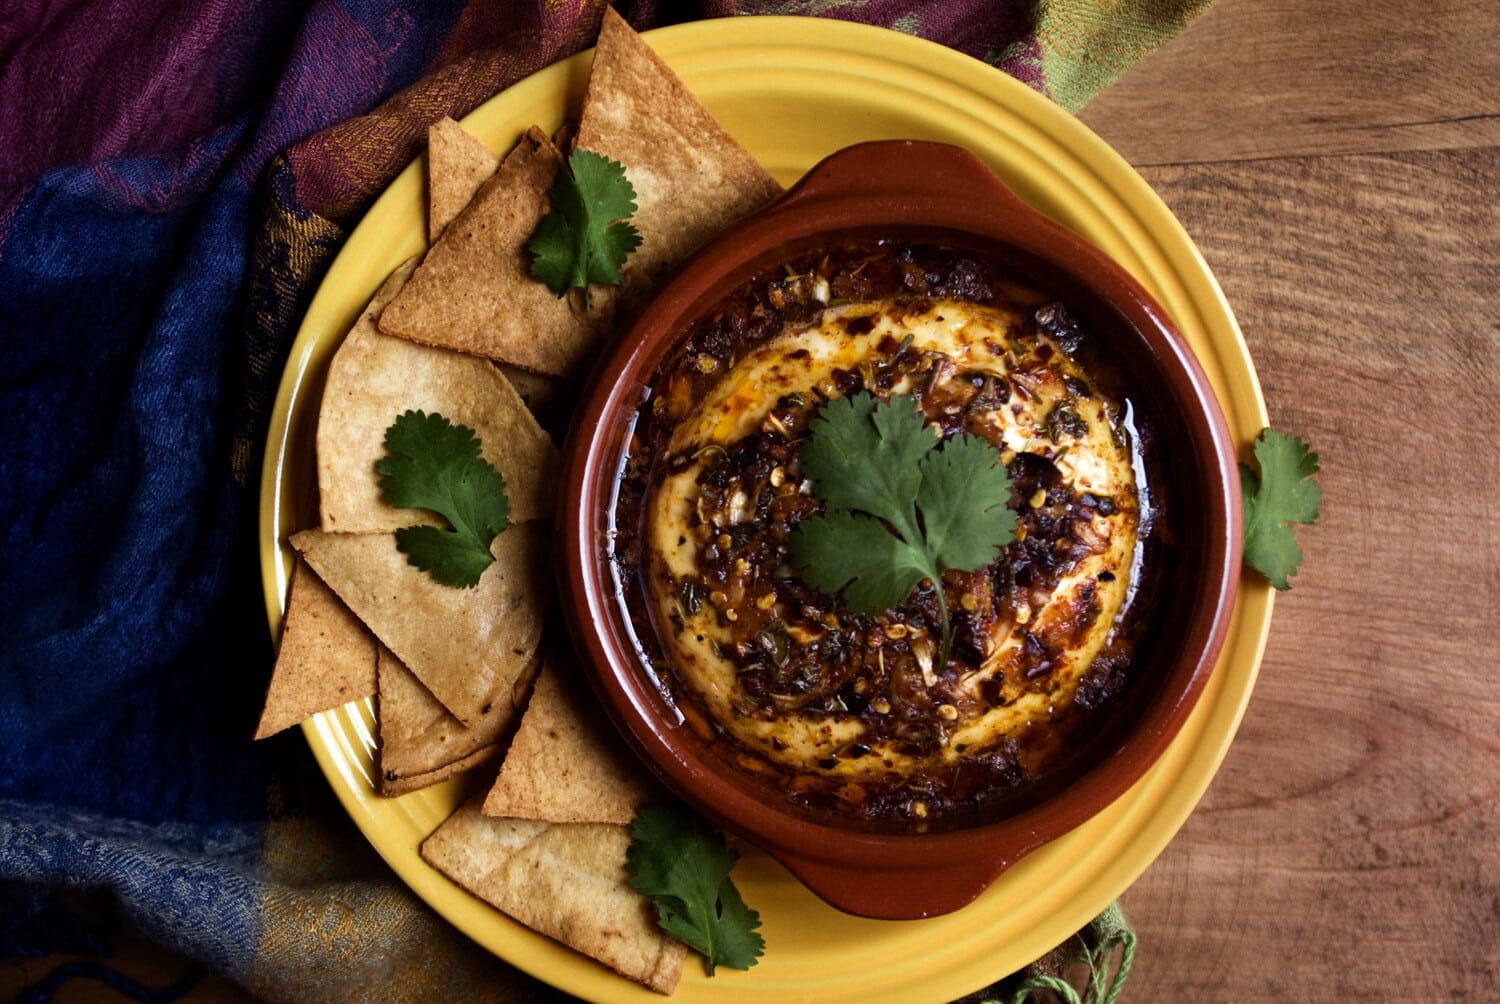 Baked Panela Cheese That Will Knock Your Socks Off